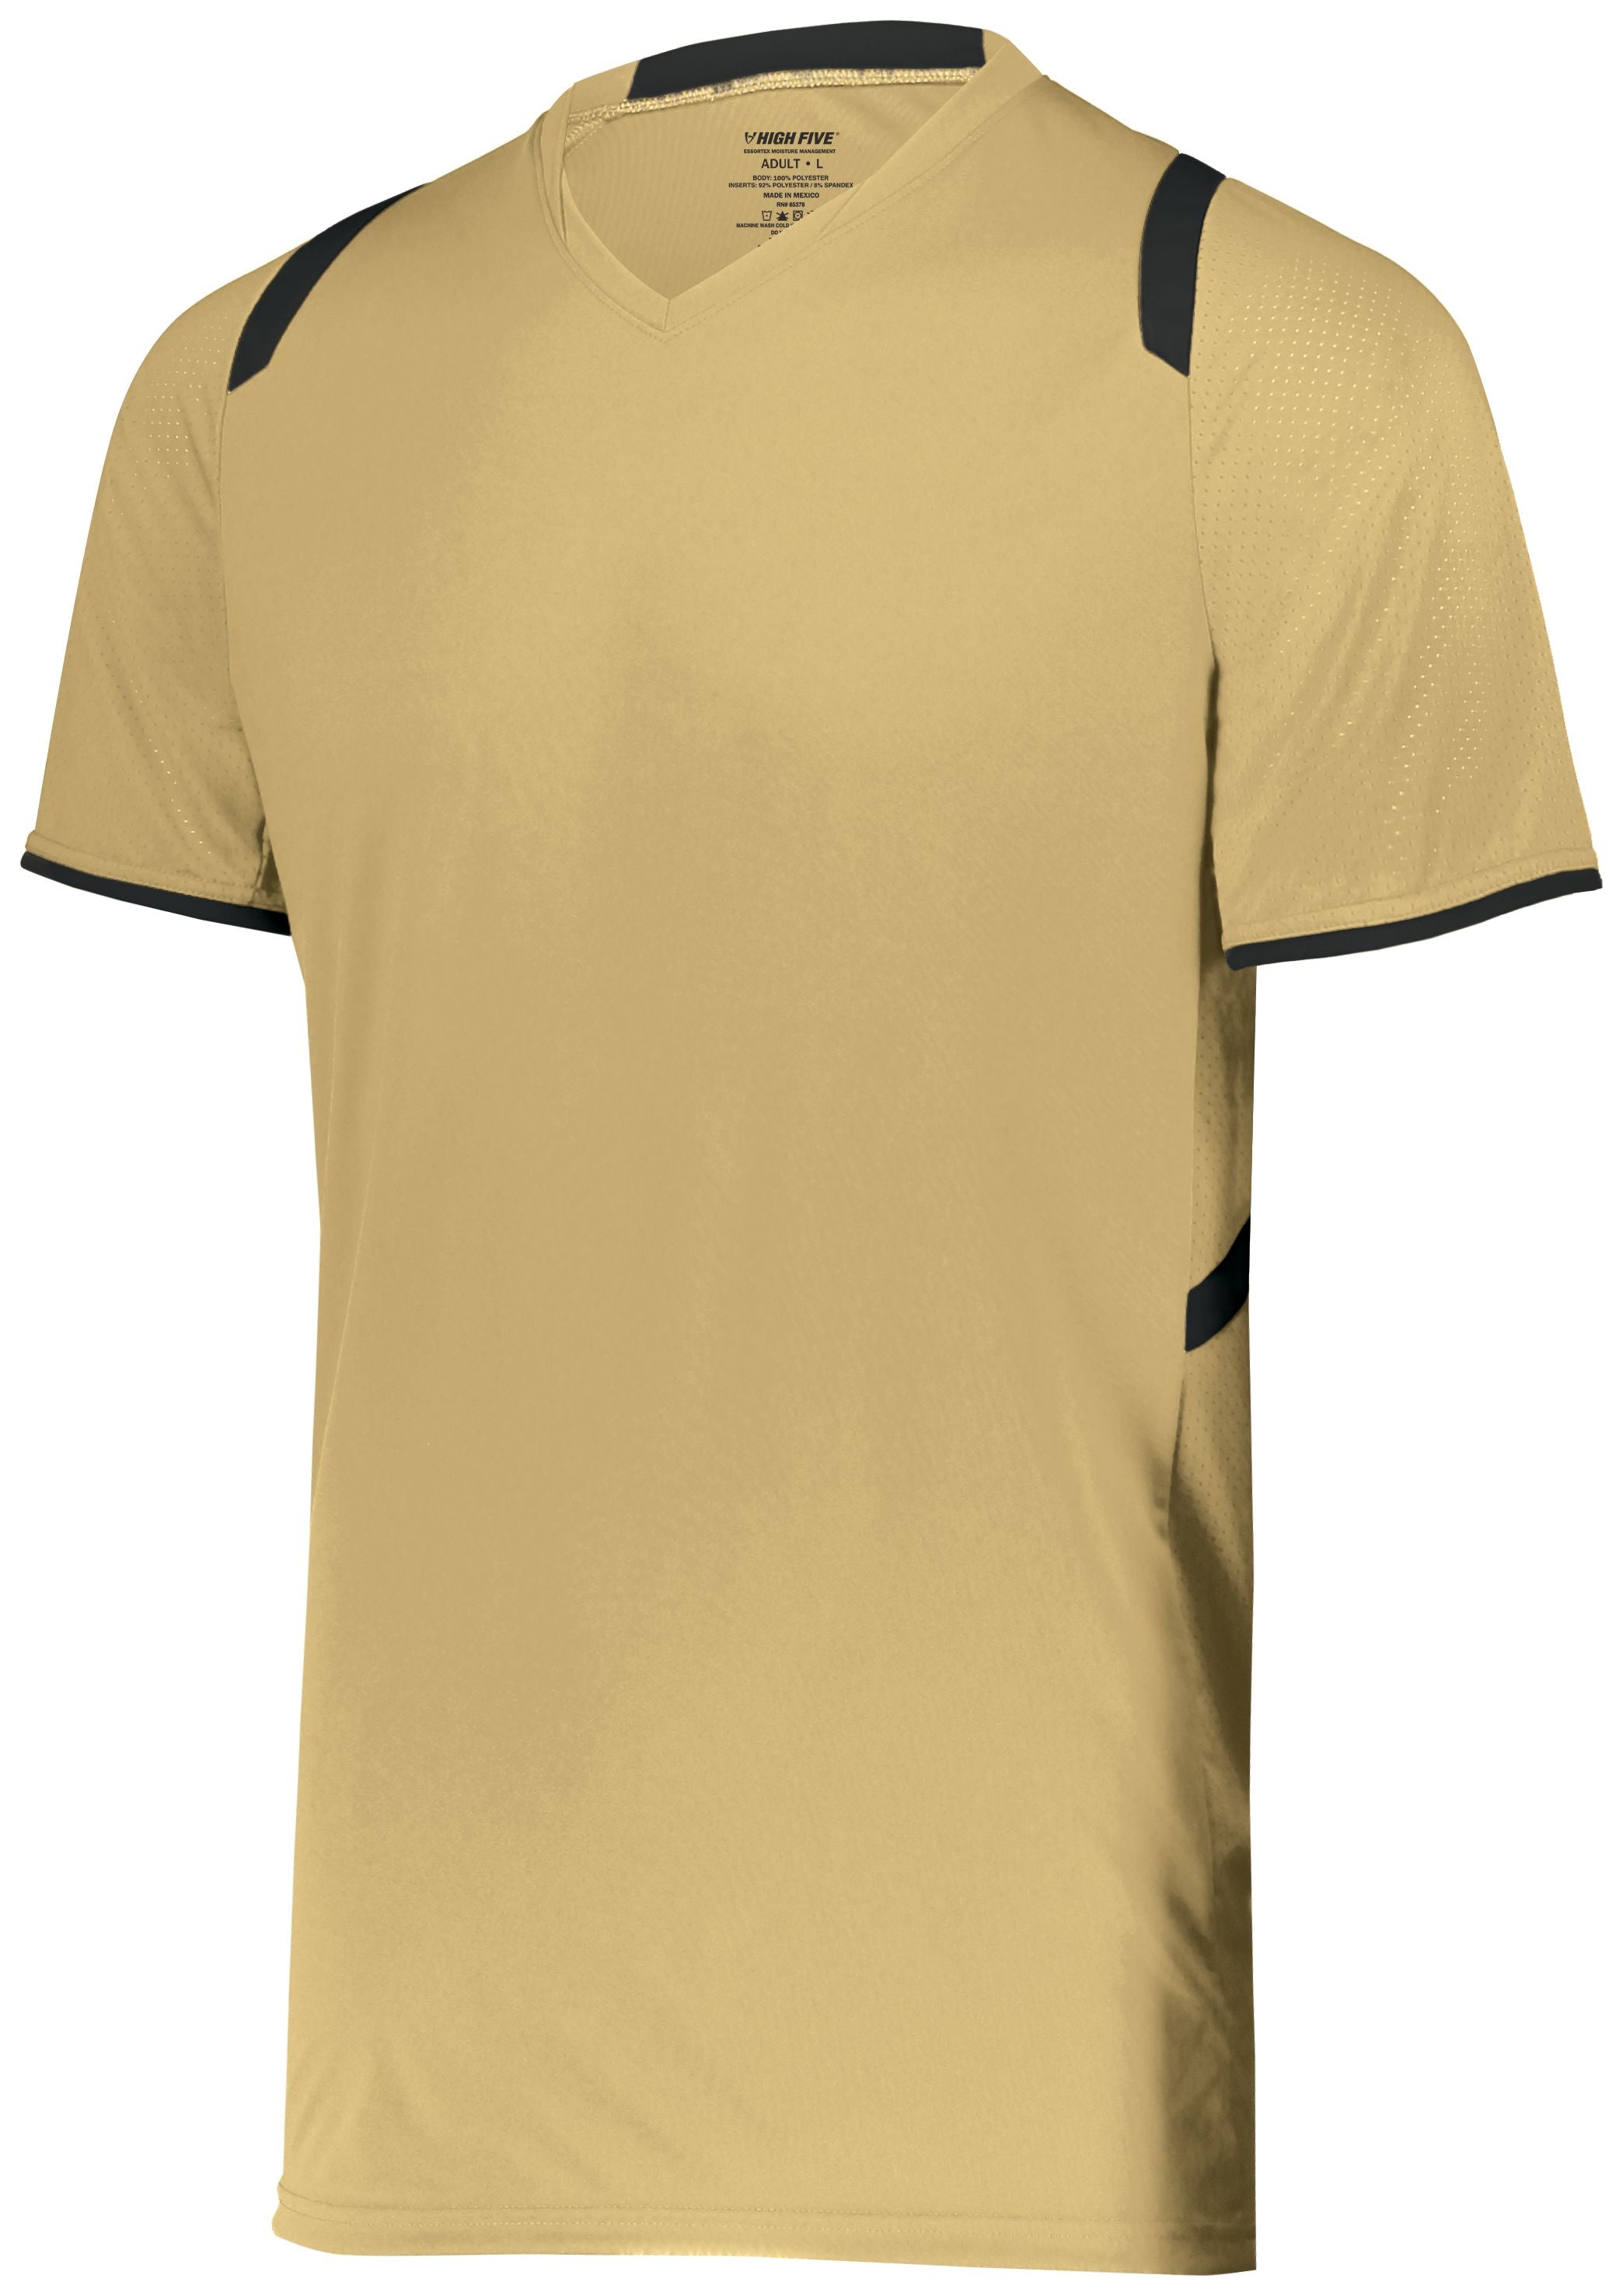 High 5 Youth Millennium Soccer Jersey in Vegas Gold/Black  -Part of the Youth, Youth-Jersey, High5-Products, Soccer, Shirts, All-Sports-1 product lines at KanaleyCreations.com